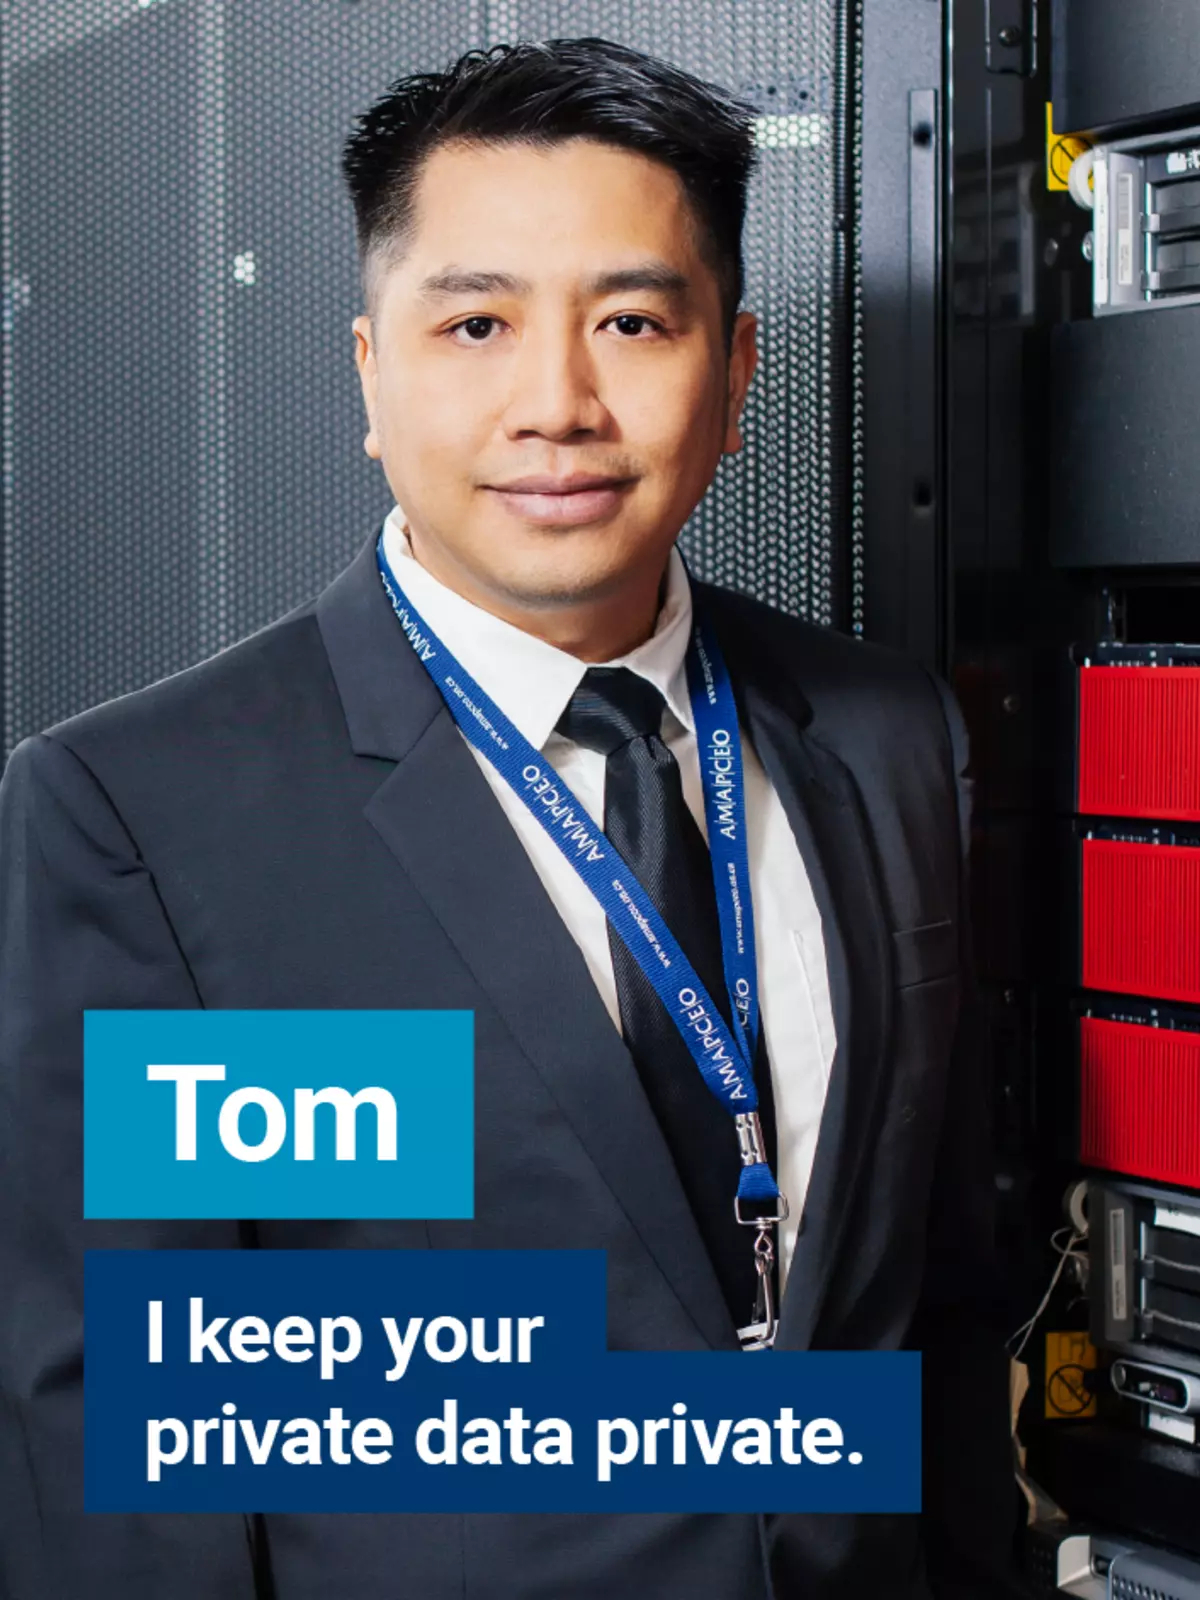 "Tom - I keep your private data private" AMAPCEO member Tom, a senior cyber security specialist